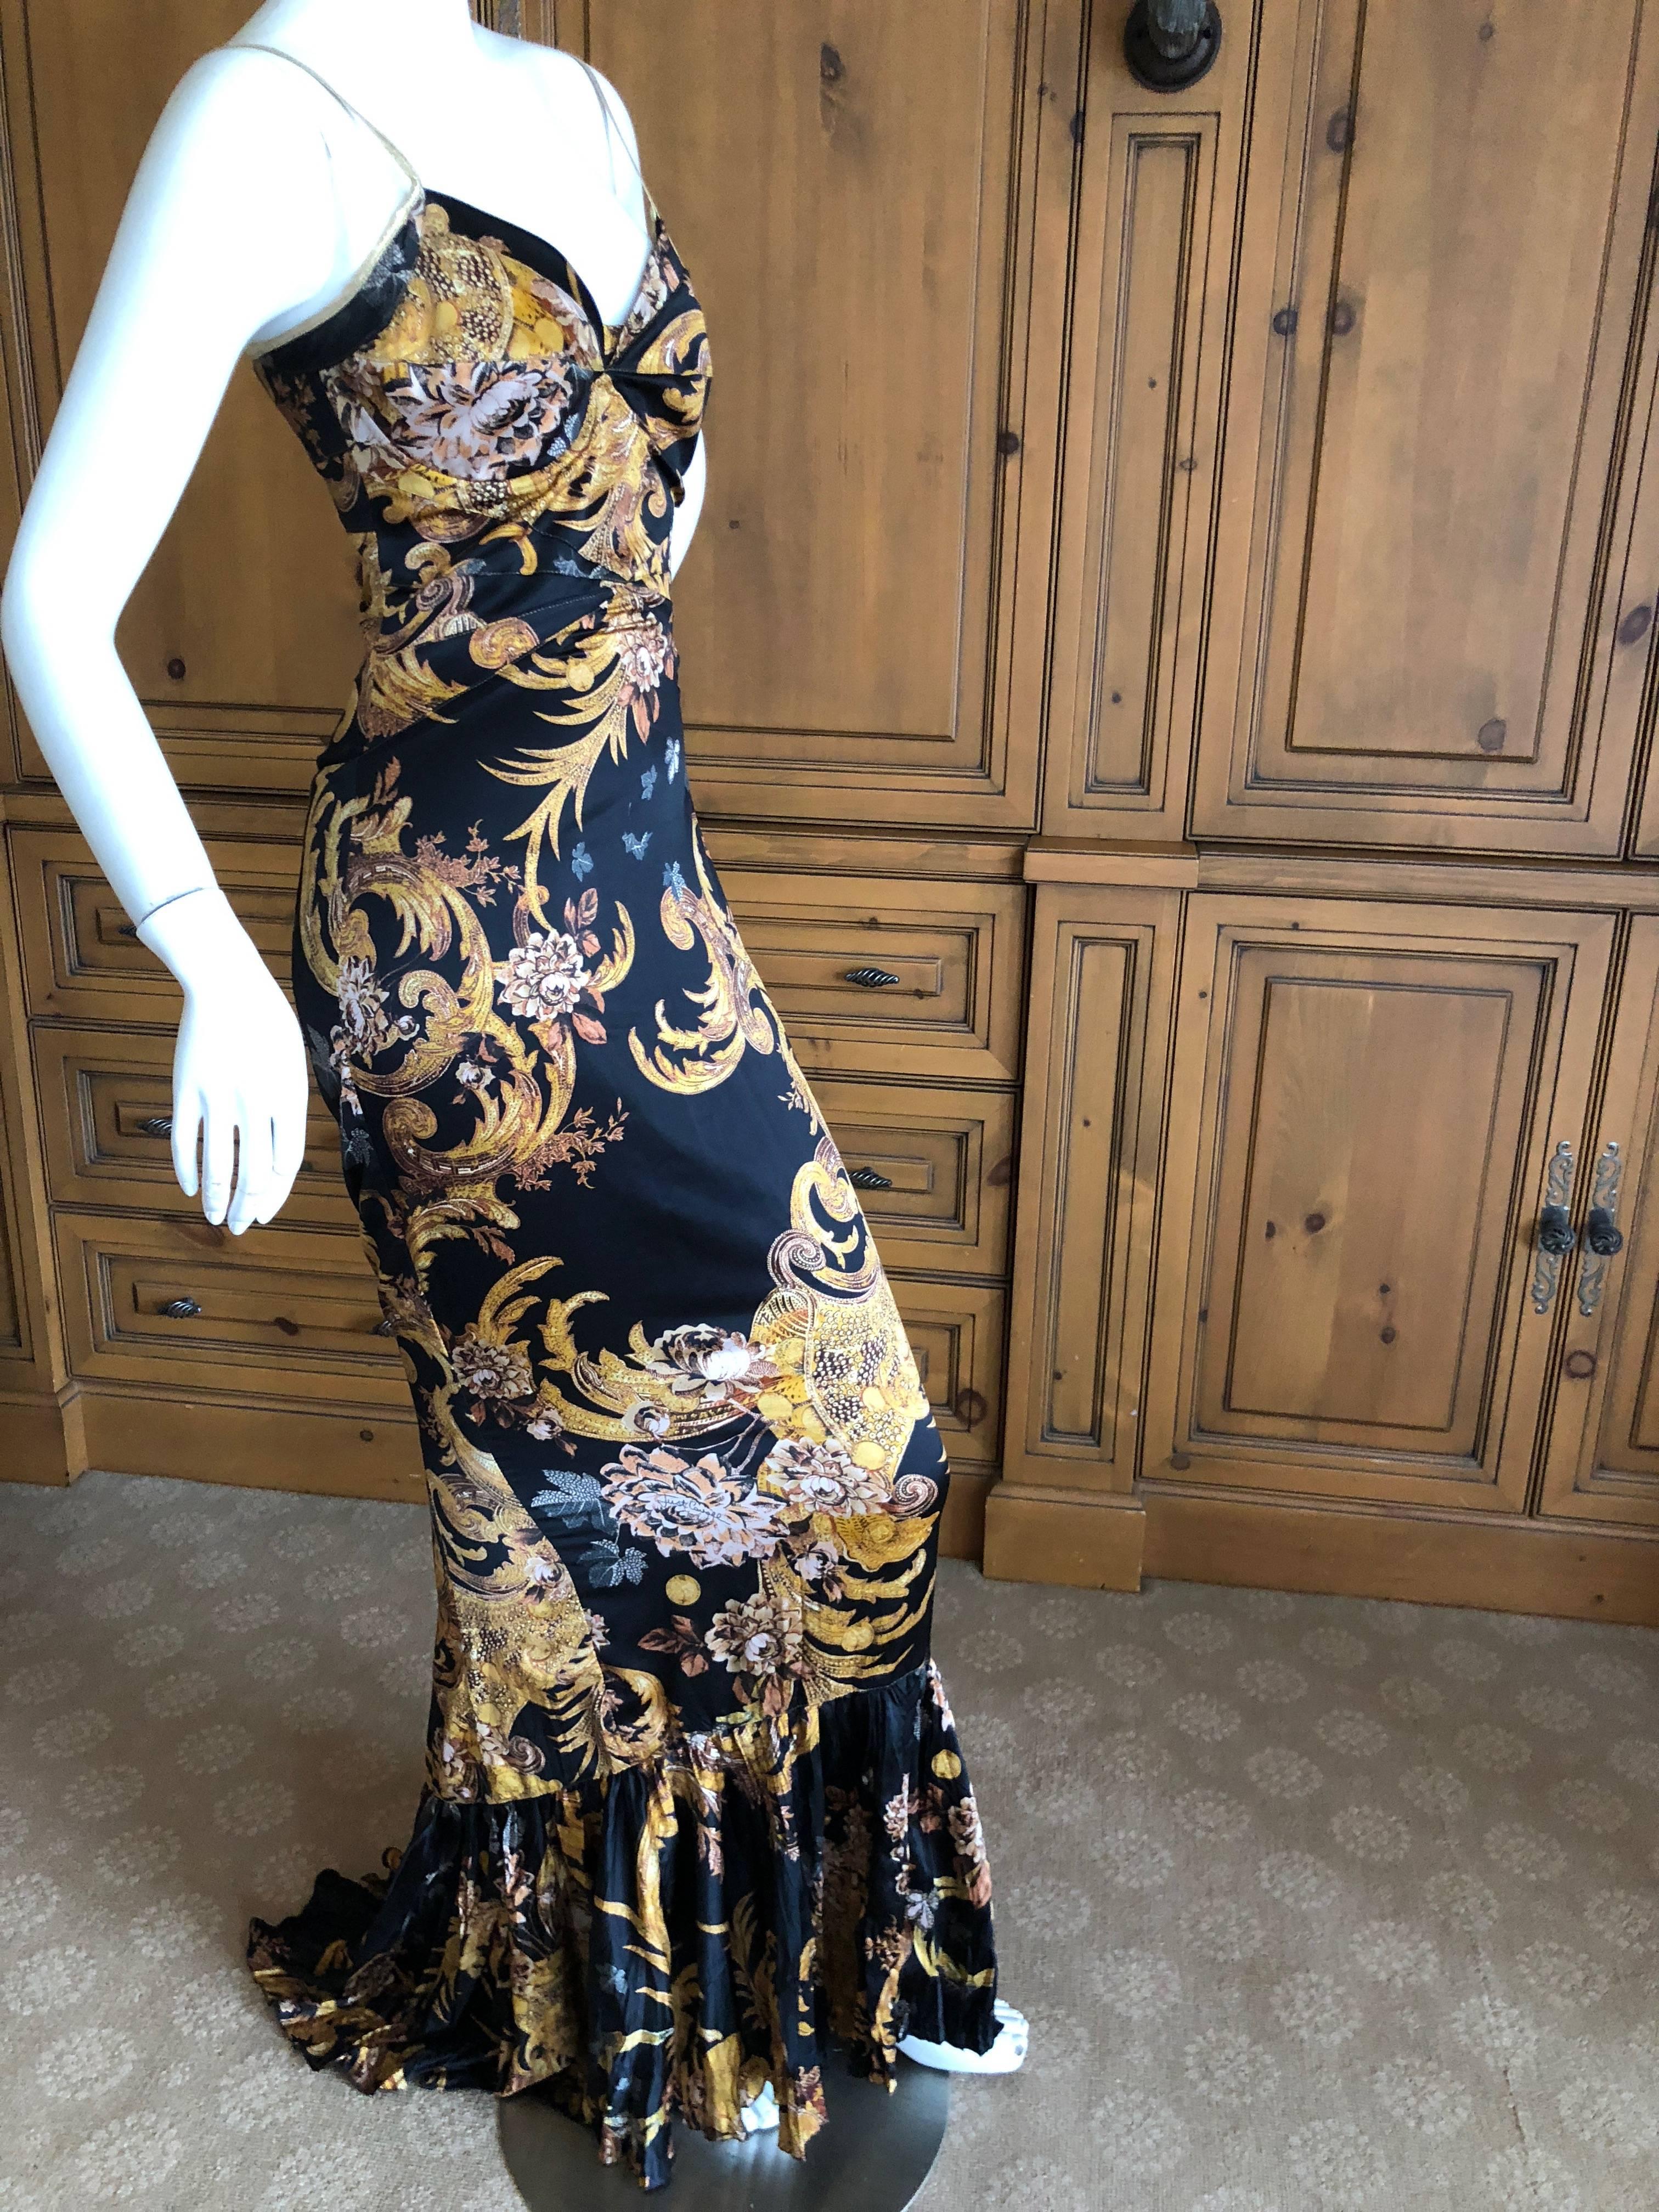 Roberto Cavalli Elegant Fishtail Mermaid Back Evening Dress.
This is so pretty, with a rich gold print, and mermaid fishtail back.
Size 38, but runs small.
Bust 34